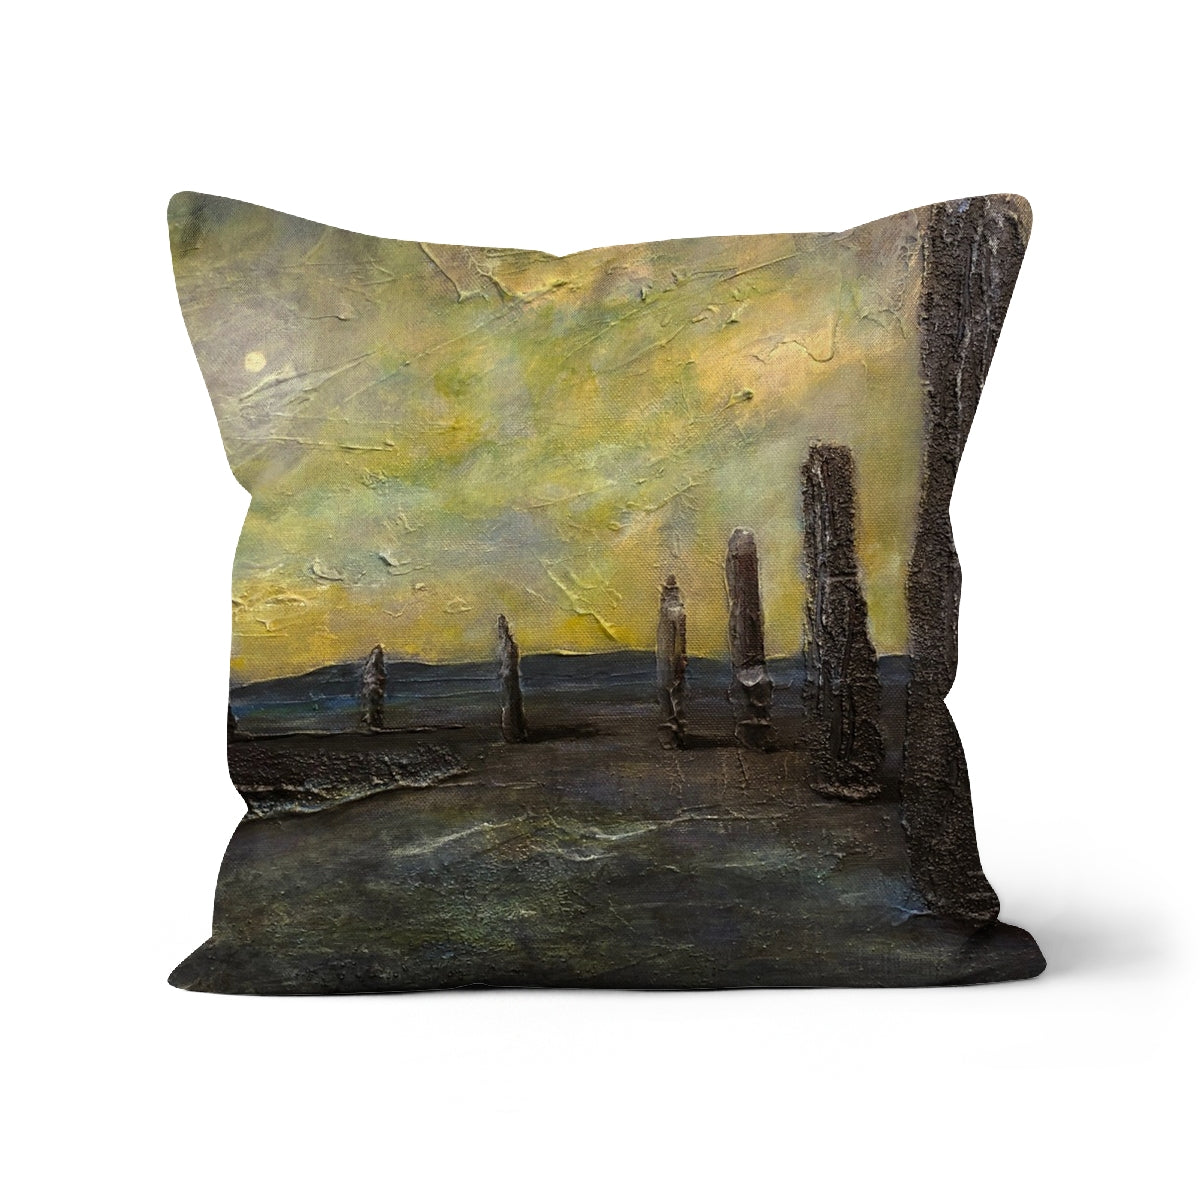 An Ethereal Ring Of Brodgar Art Gifts Cushion-Cushions-Orkney Art Gallery-Linen-18"x18"-Paintings, Prints, Homeware, Art Gifts From Scotland By Scottish Artist Kevin Hunter